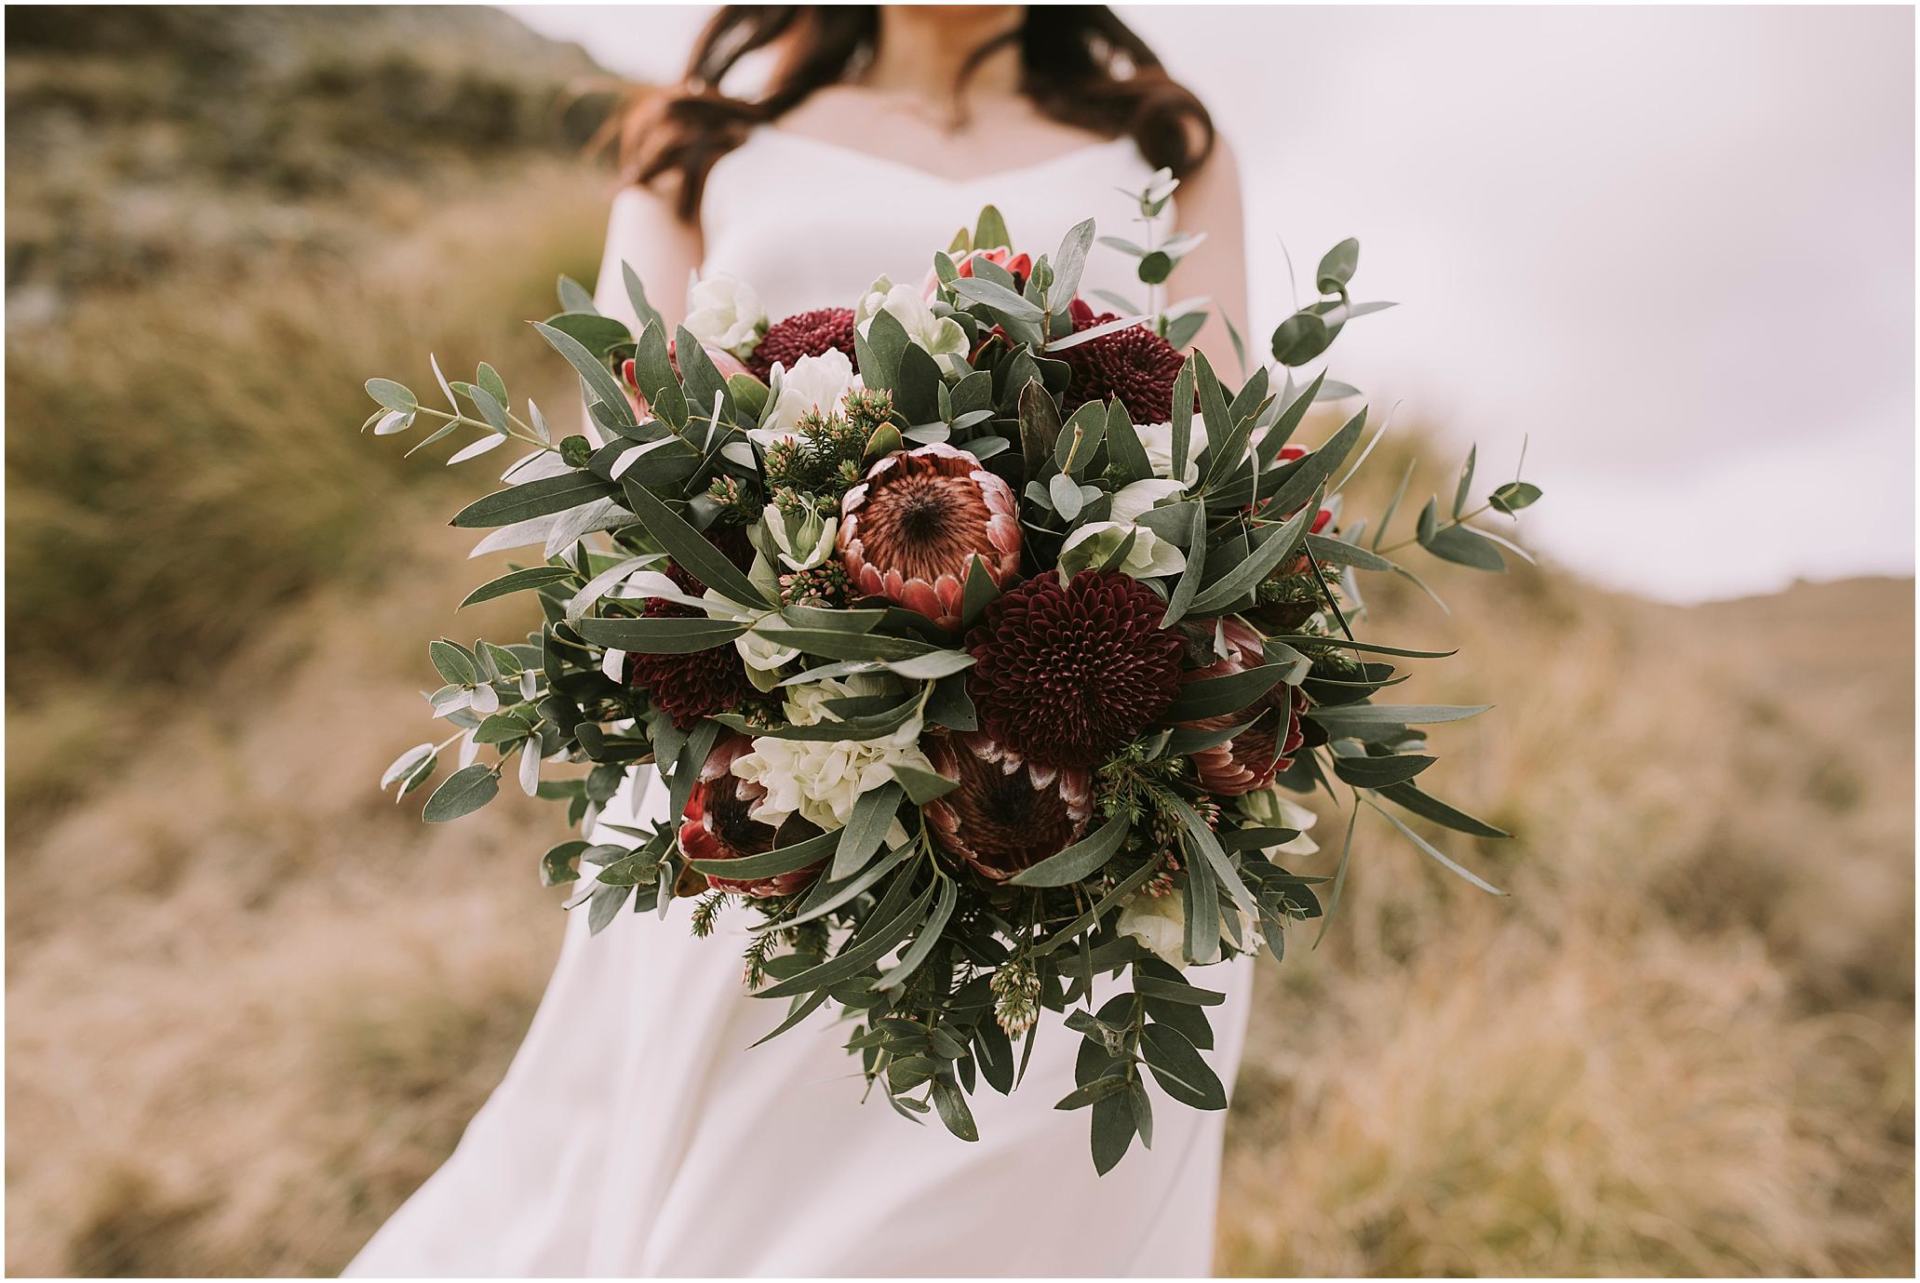 Charlotte Kiri Photography - Engagement, Pre and Post-Wedding Photography with a bride standing on a mountainside, wearing a pretty white V-necked sleeveless gown and holding a rustic bouquet with burgundy and white coloured flowers, and green foliage, in Wanaka, New Zealand